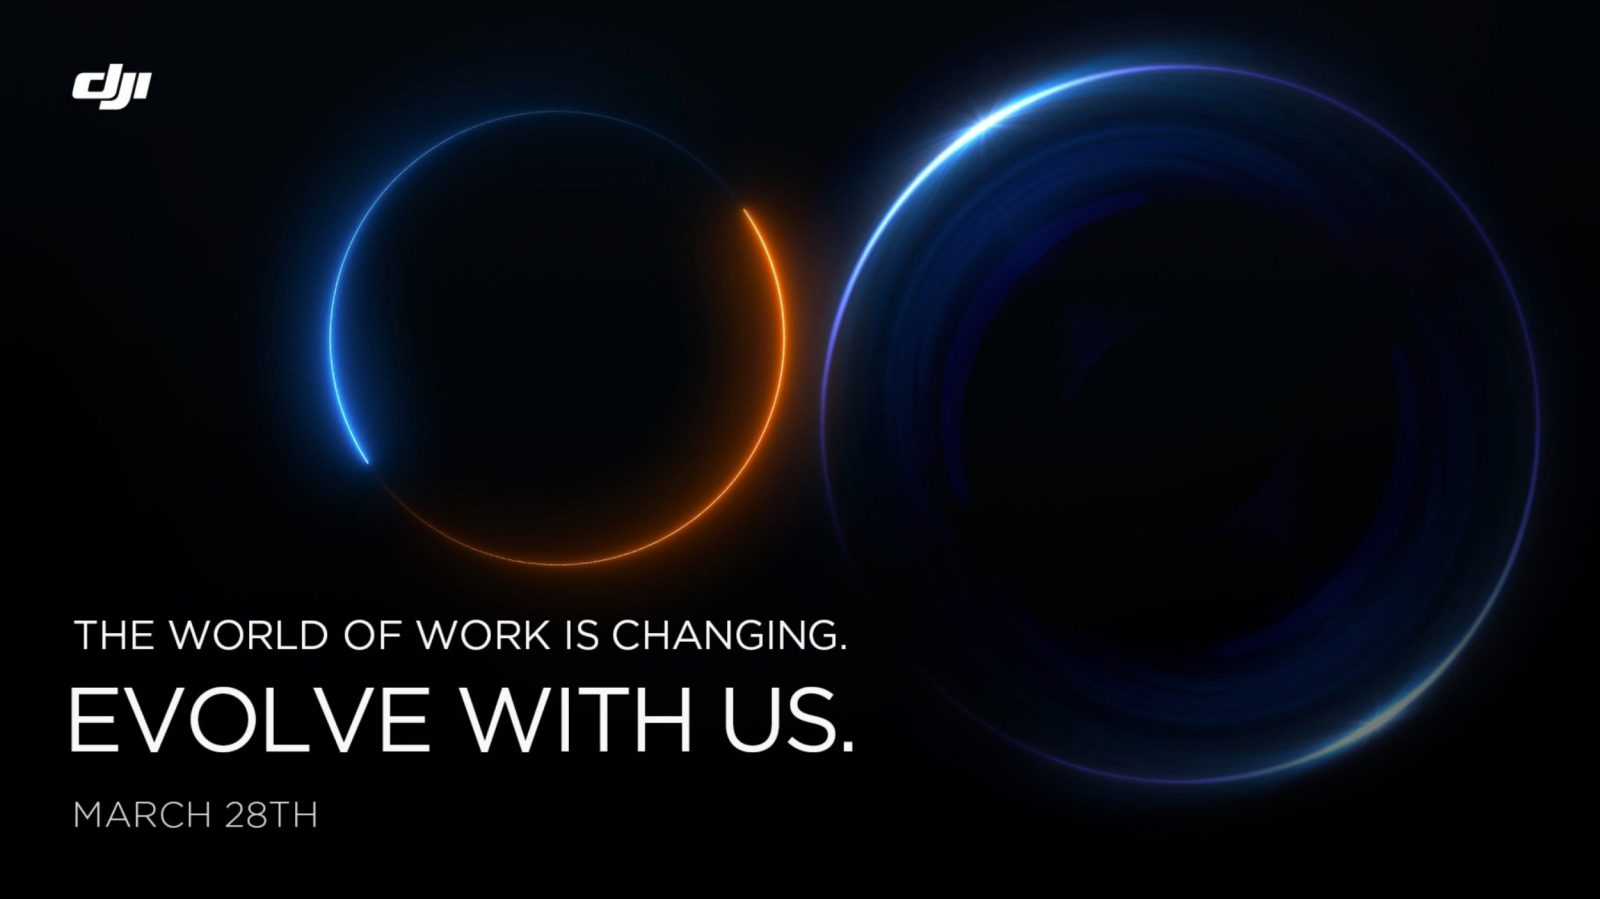 DJI Announcement: The world of work is changing. Evolve with us. March 28th